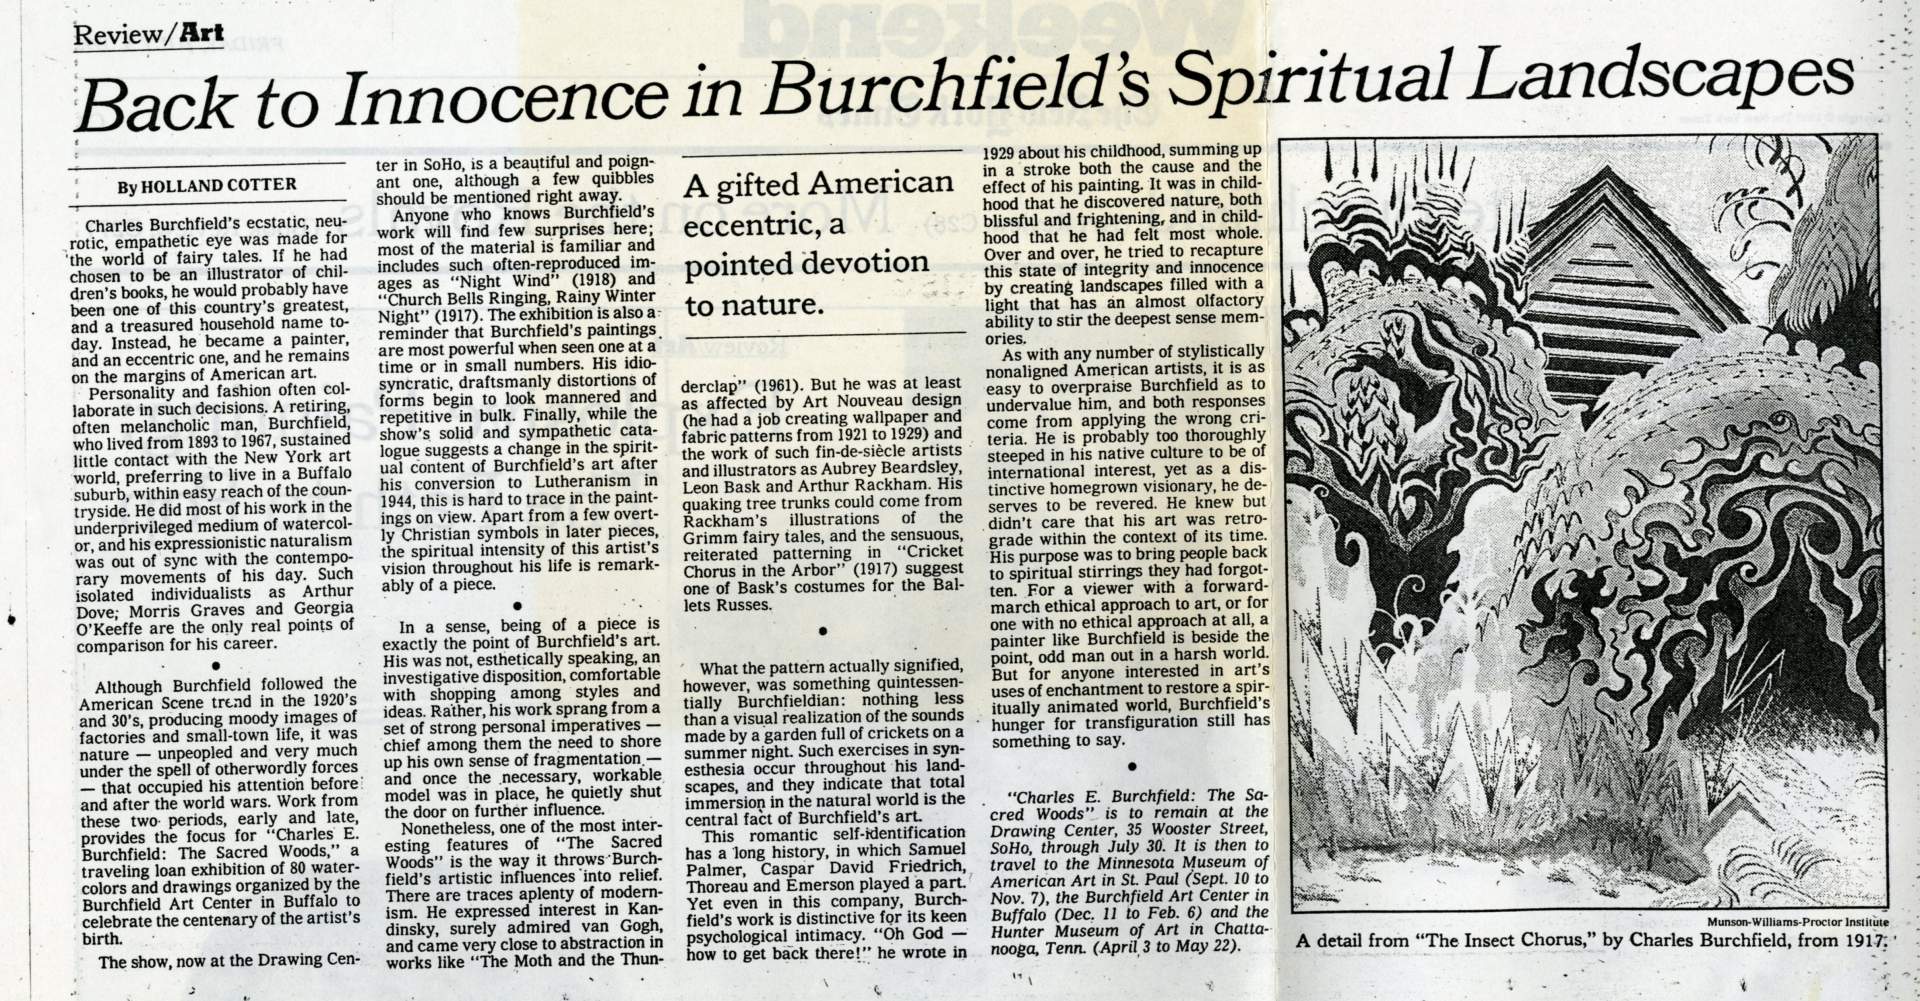 News Article [Back to Innocence in Burchfield's Spiritual Landscape]